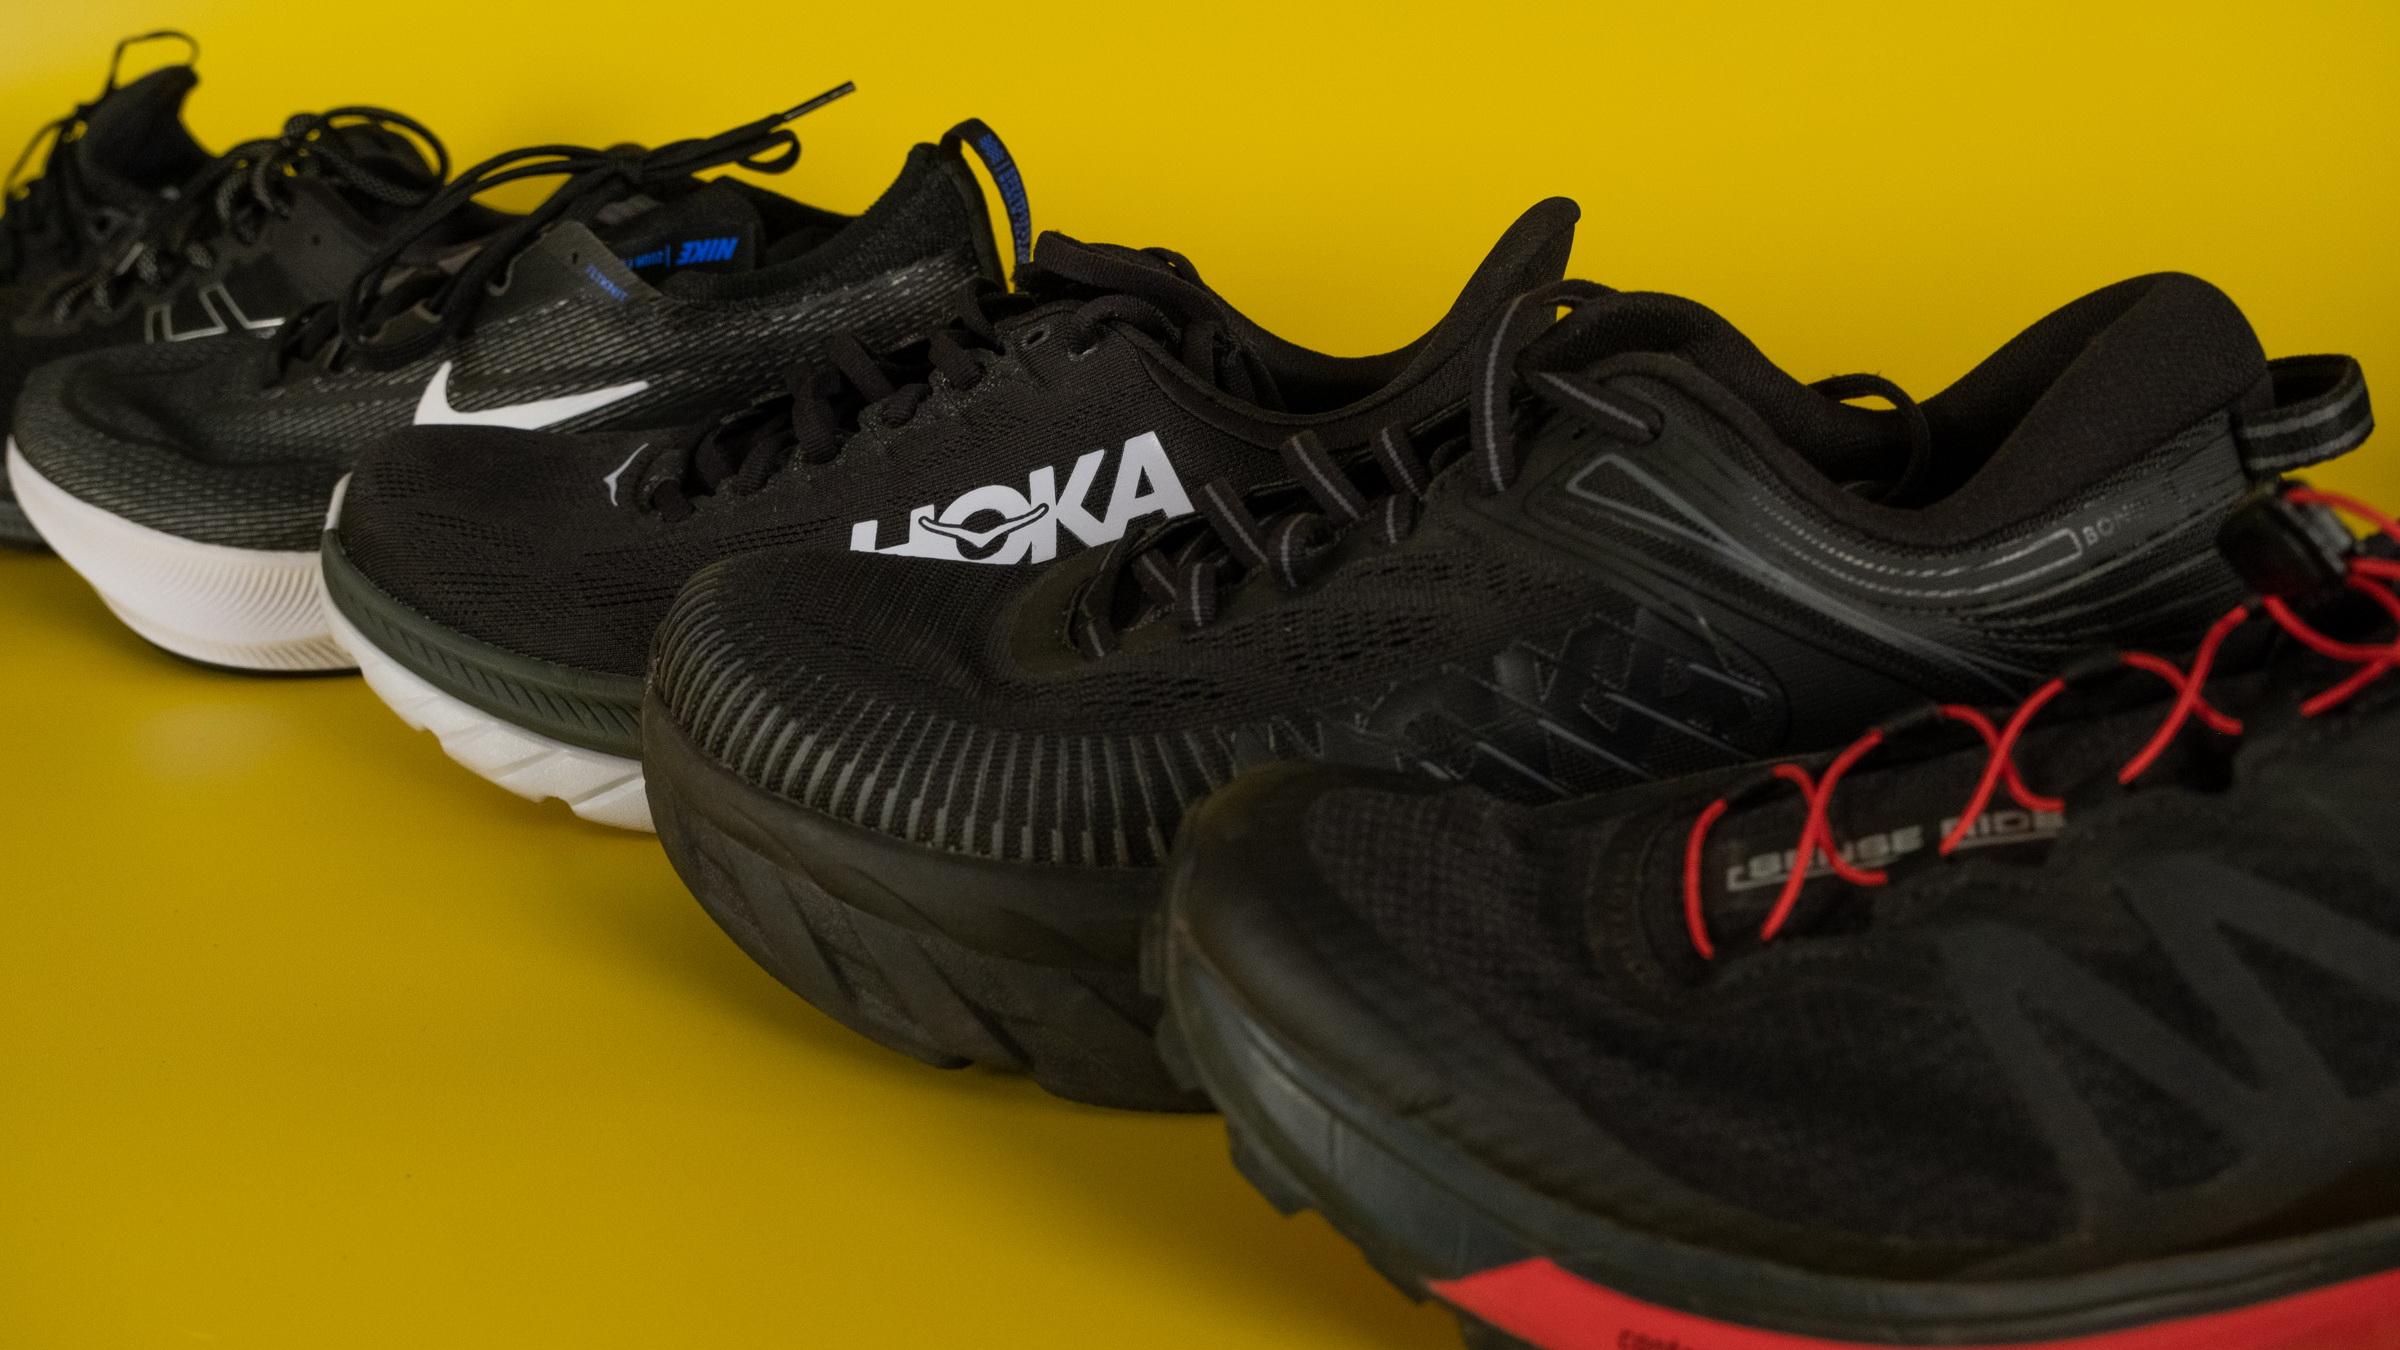 10 Best Black Running Shoes in 2022